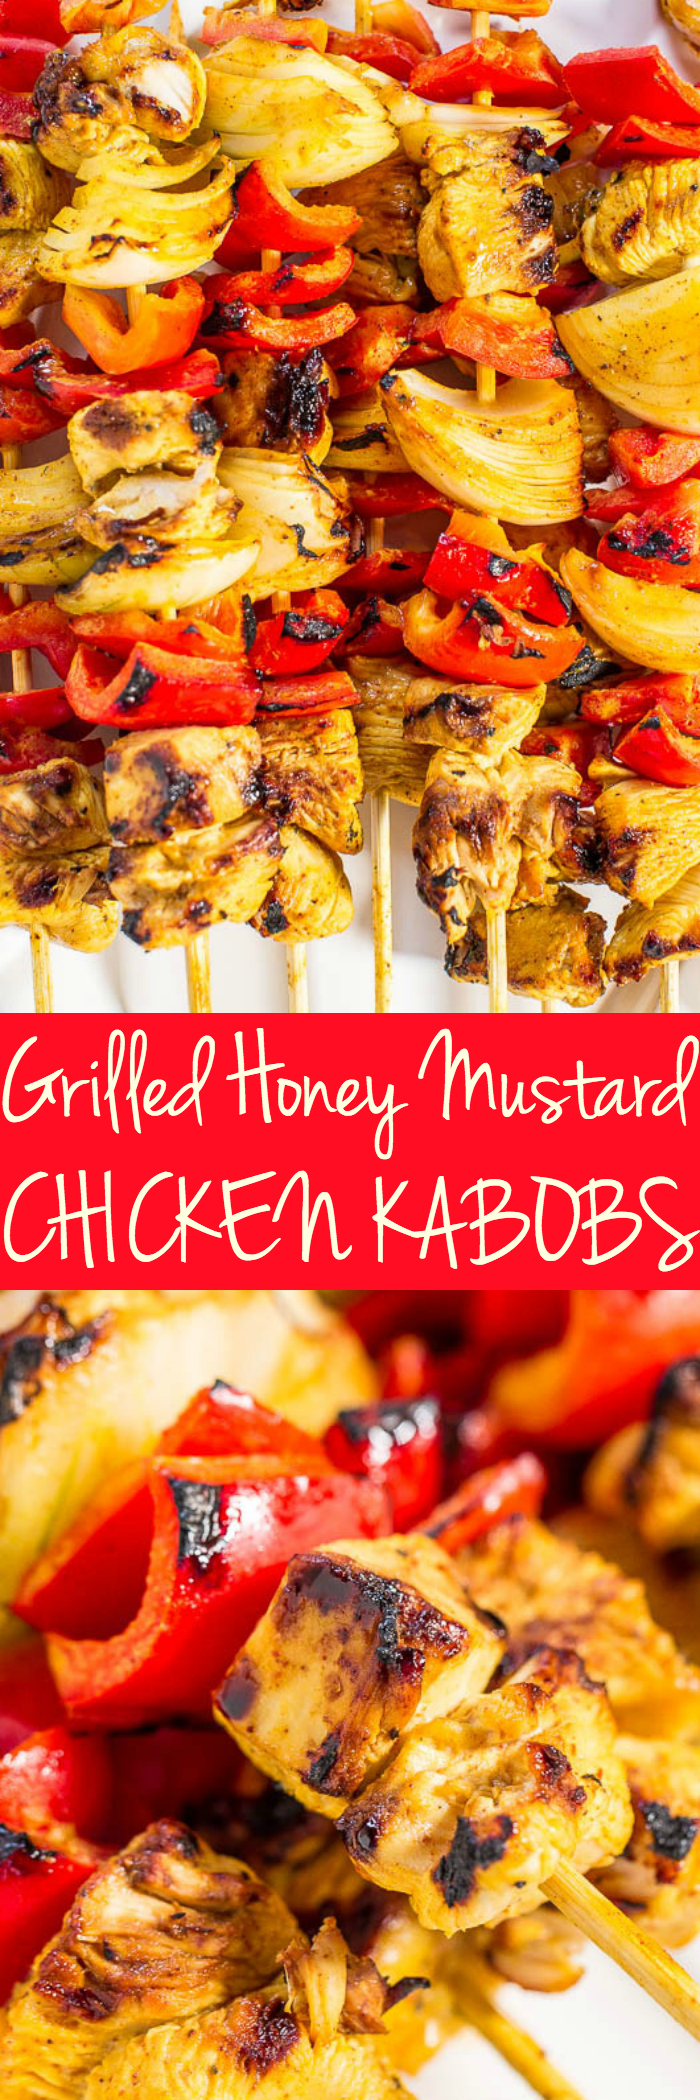 Honey Mustard Grilled Chicken Kabobs - Juicy chicken and crisp vegetables coated in a sweet-and-tangy sauce!! Great for parties or easy weeknight dinners! Everything tastes better grilled!!